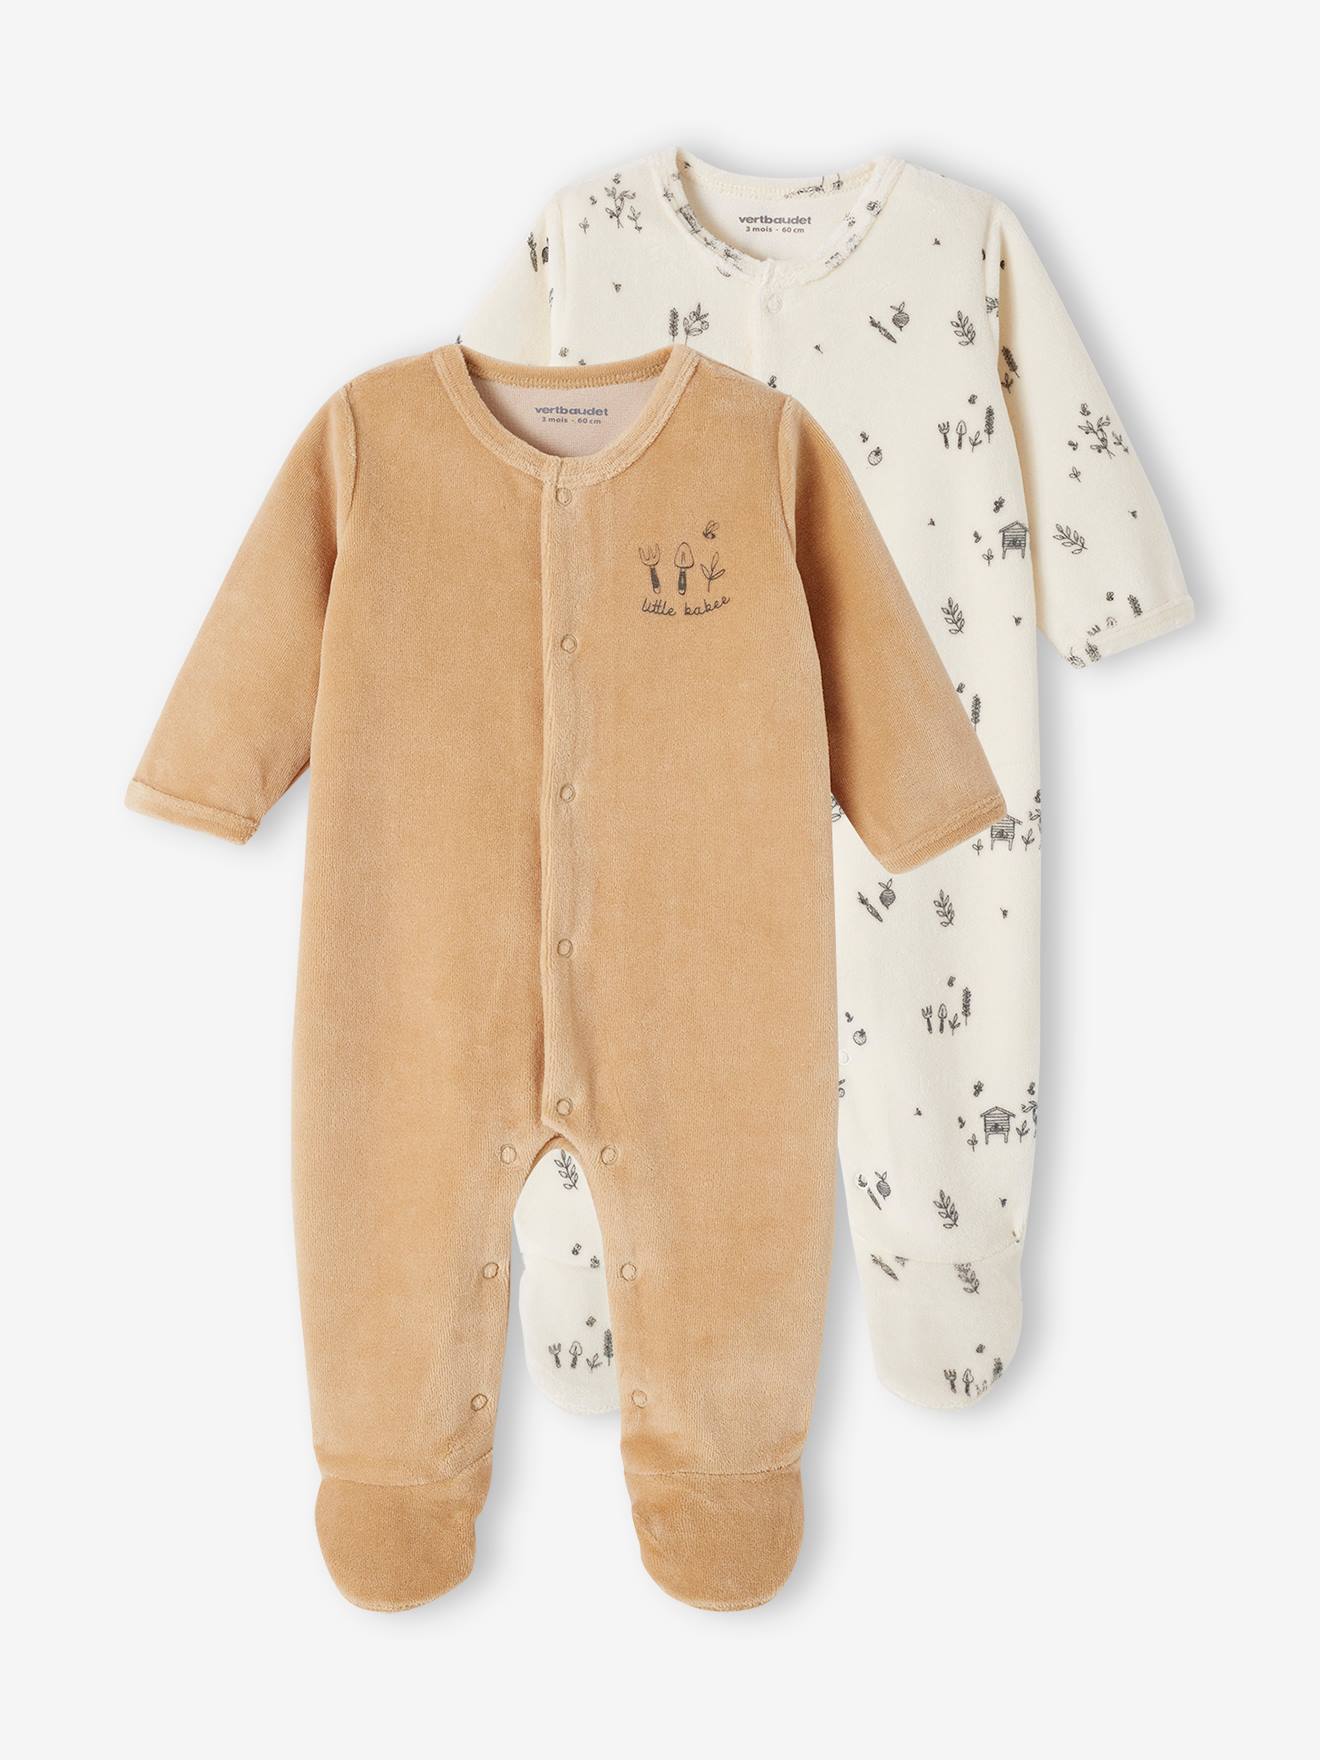 Pack of 2 Sleepsuits in Velour for Newborn Babies golden yellow